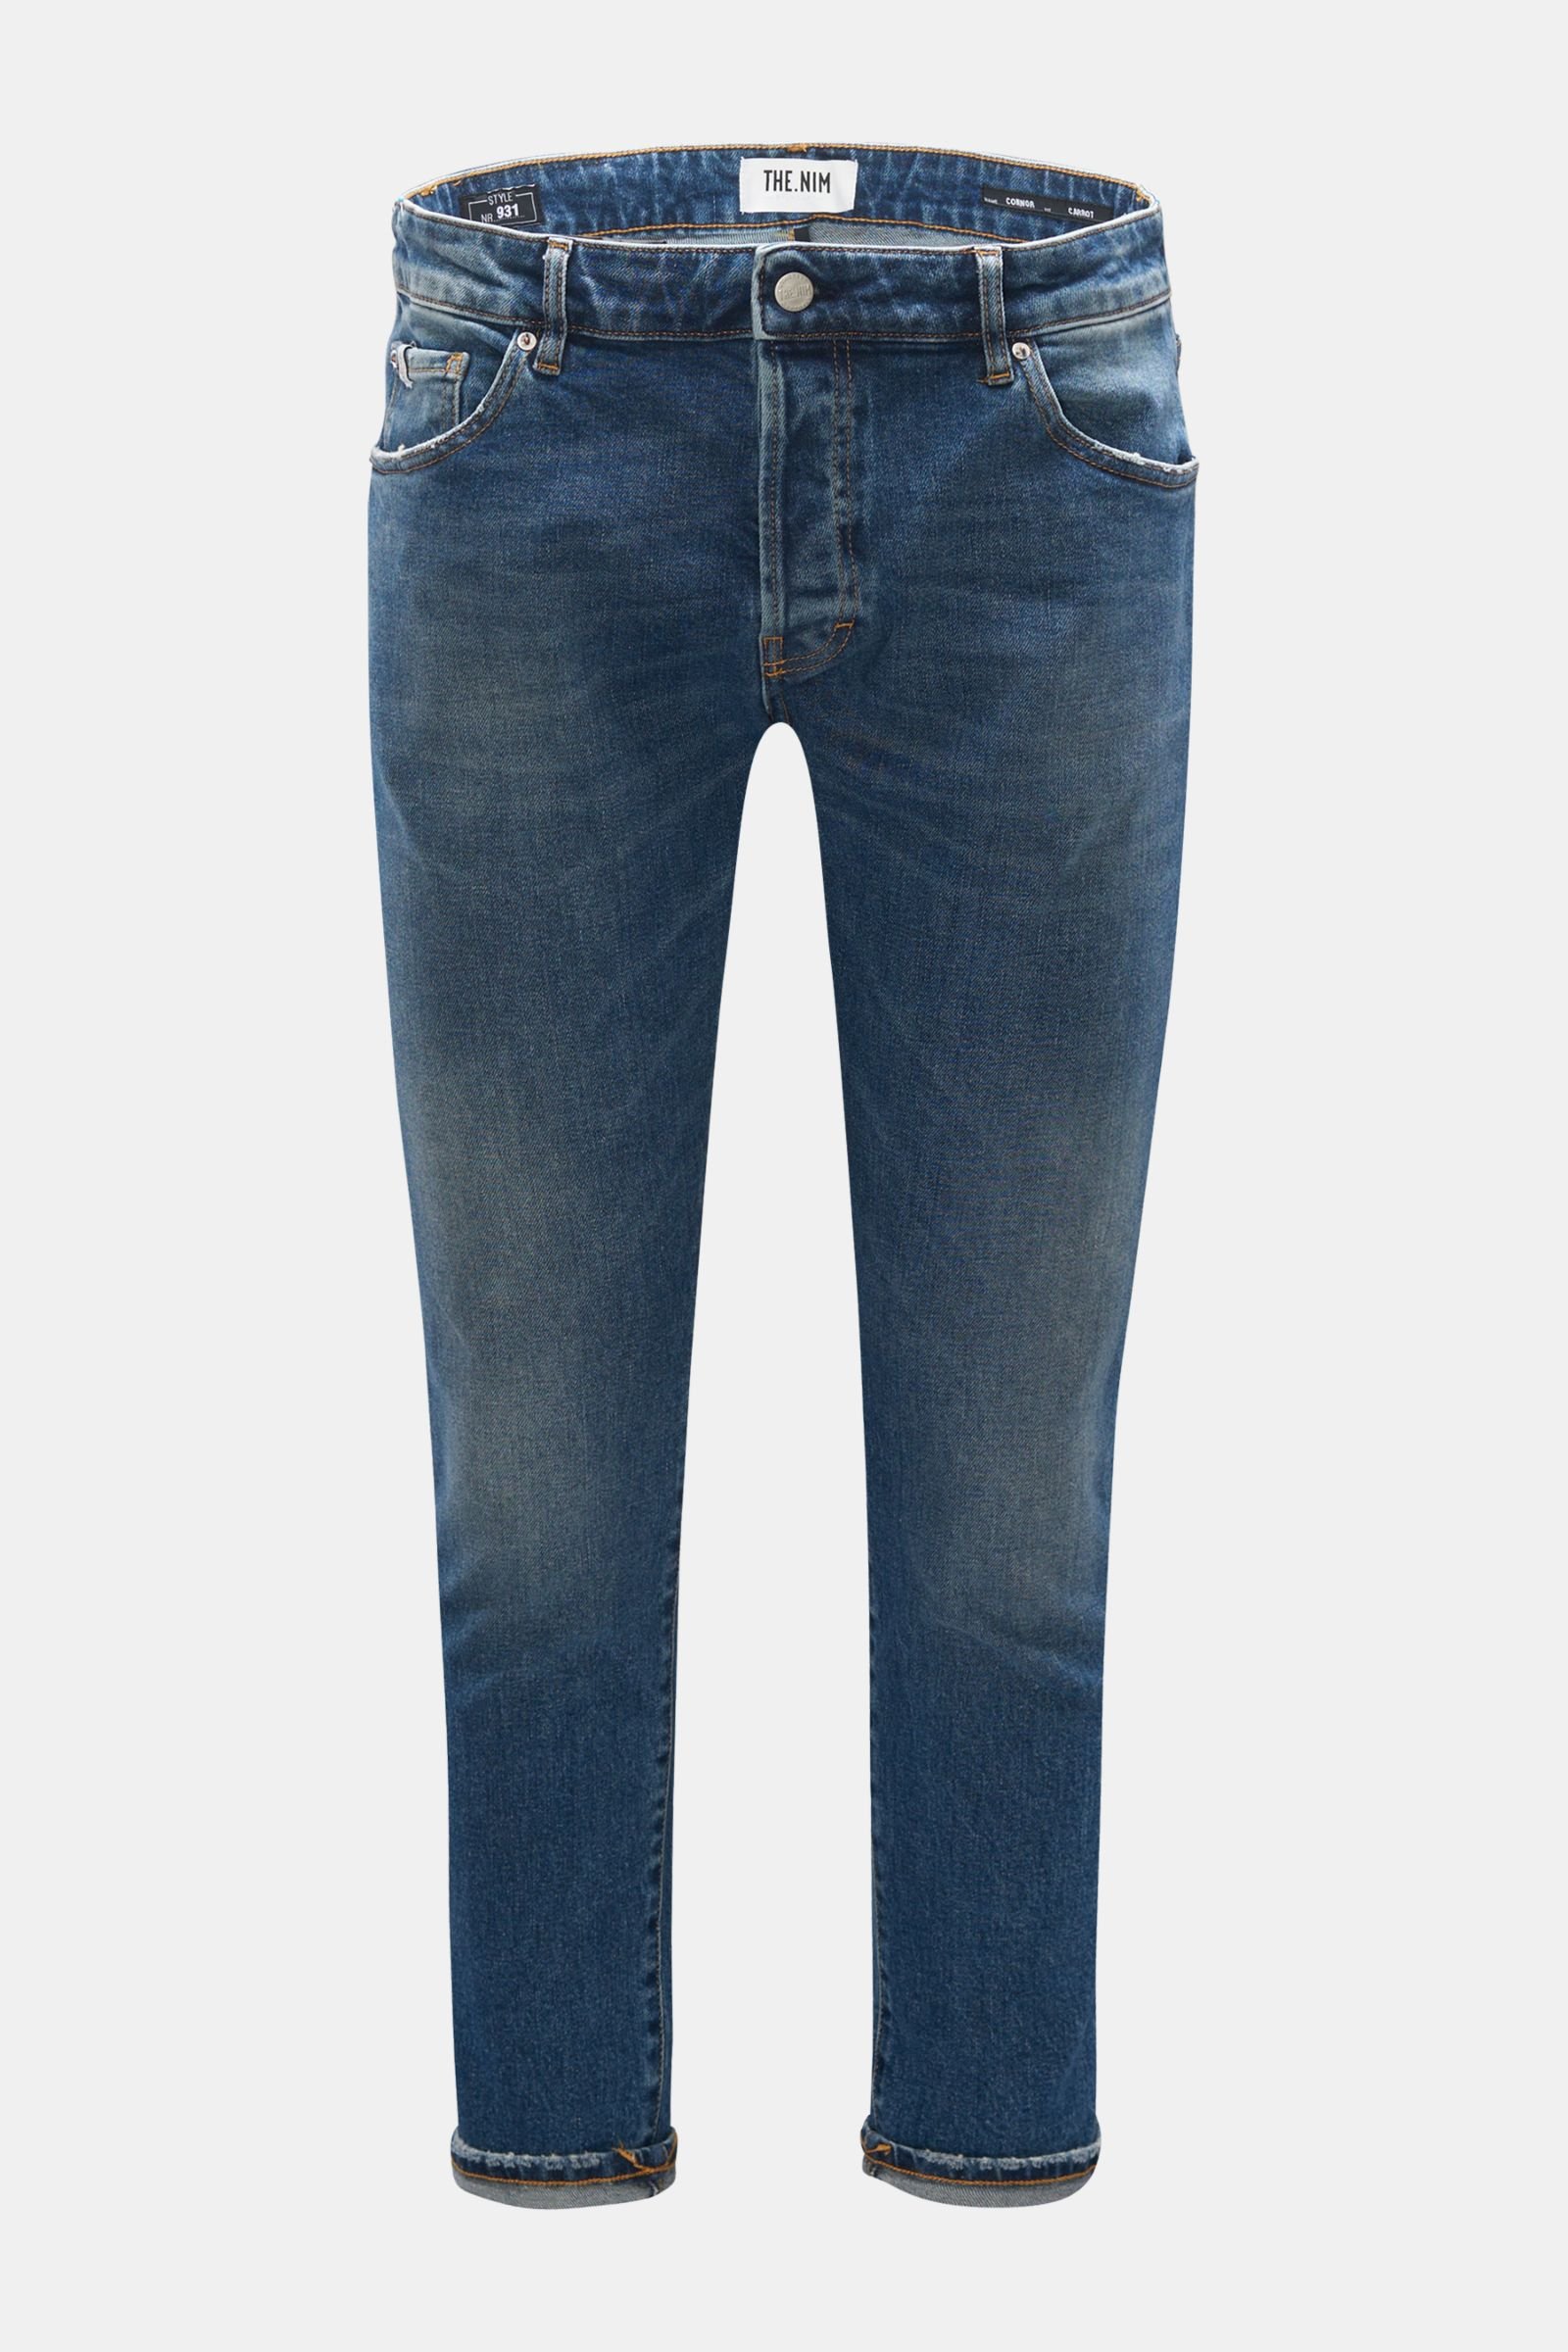 Jeans '931 Connor Carrot Fit' grey-blue